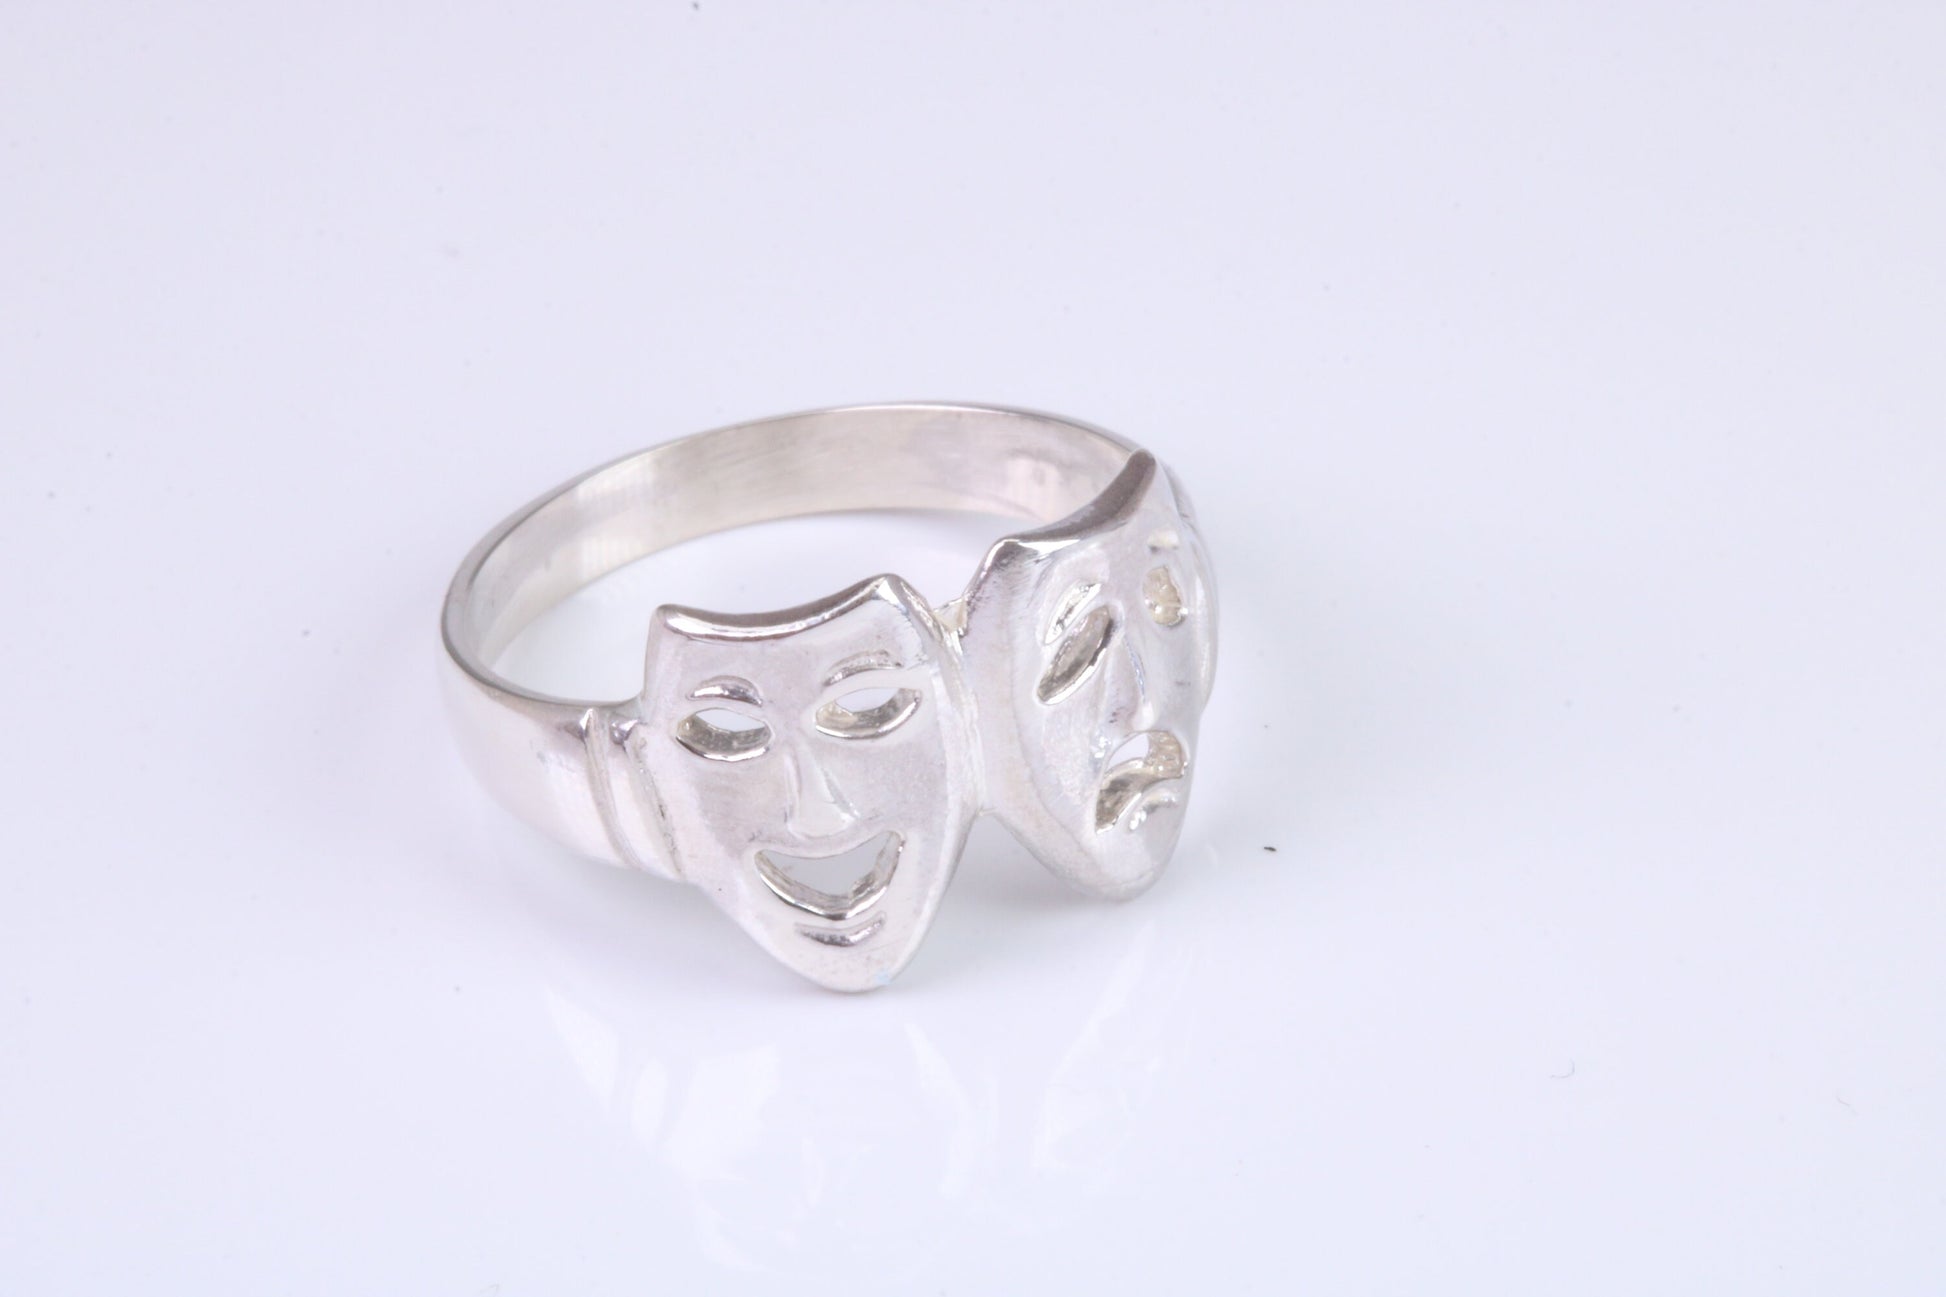 Happy and Sad mask ring, solid silver, suitable for ladies or gents. Available in silver, yellow gold, white gold and platinum